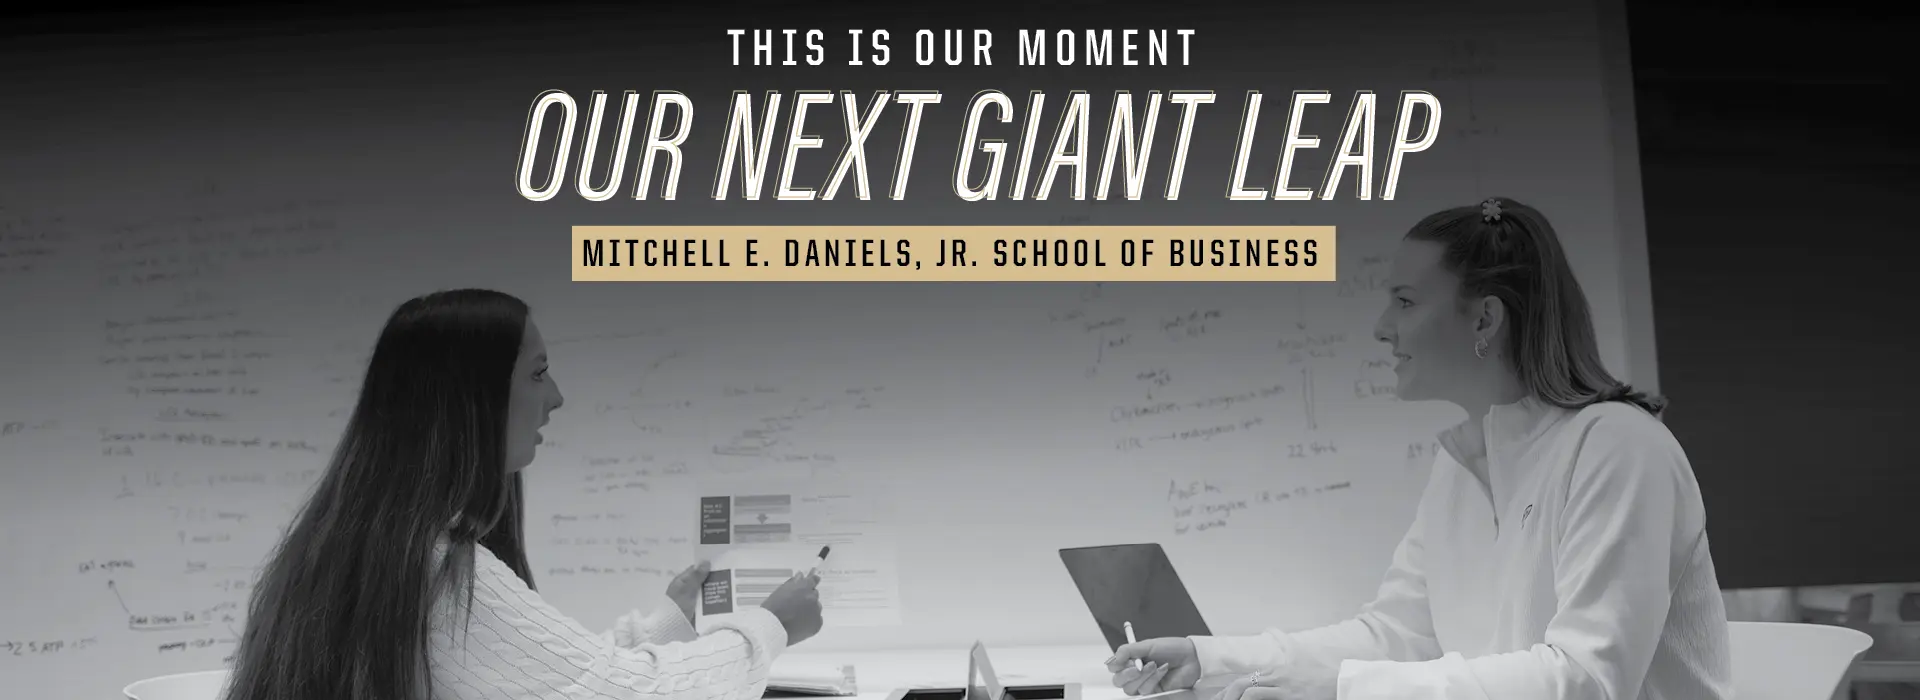 This is our moment, our next giant leap, Mitchell E. Daniels, Jr. School of Business